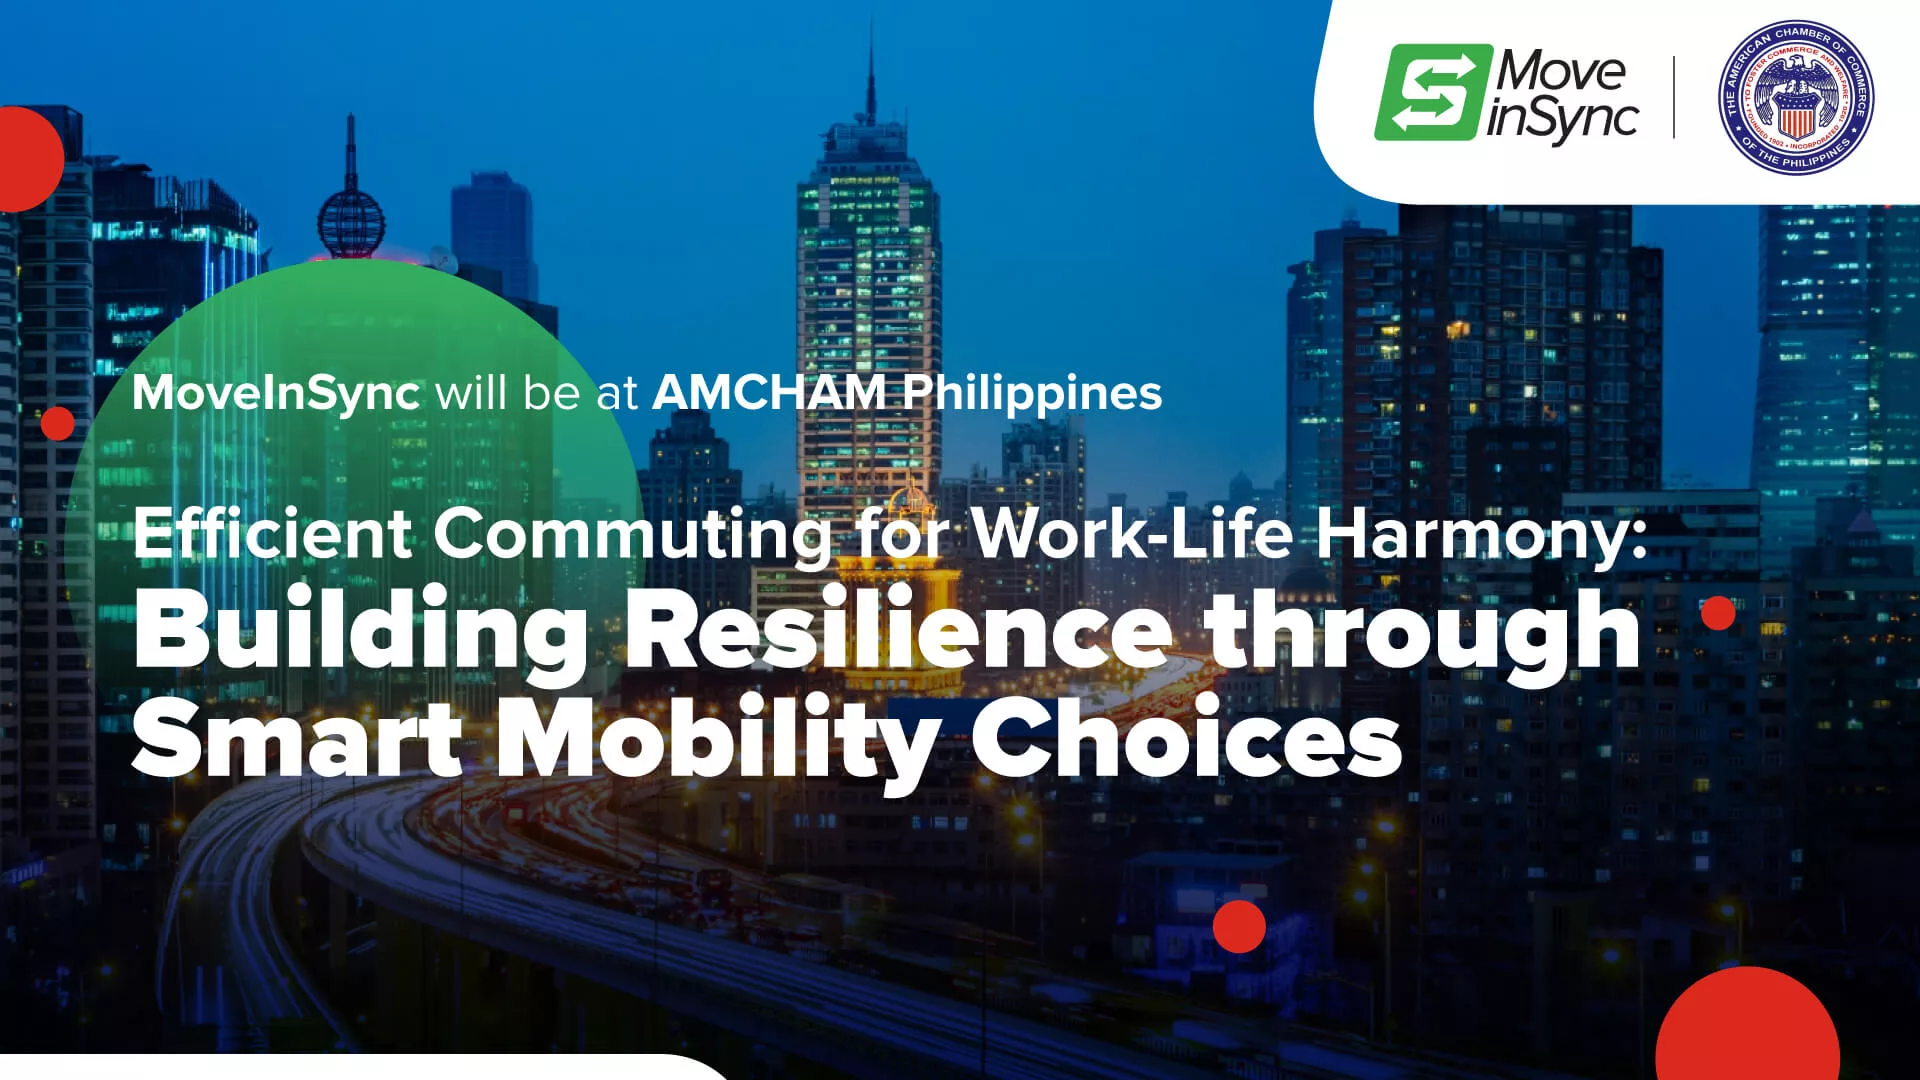 Efficient Commuting for Work-Life Harmony: Building Resilience Through Smart Mobility Choices